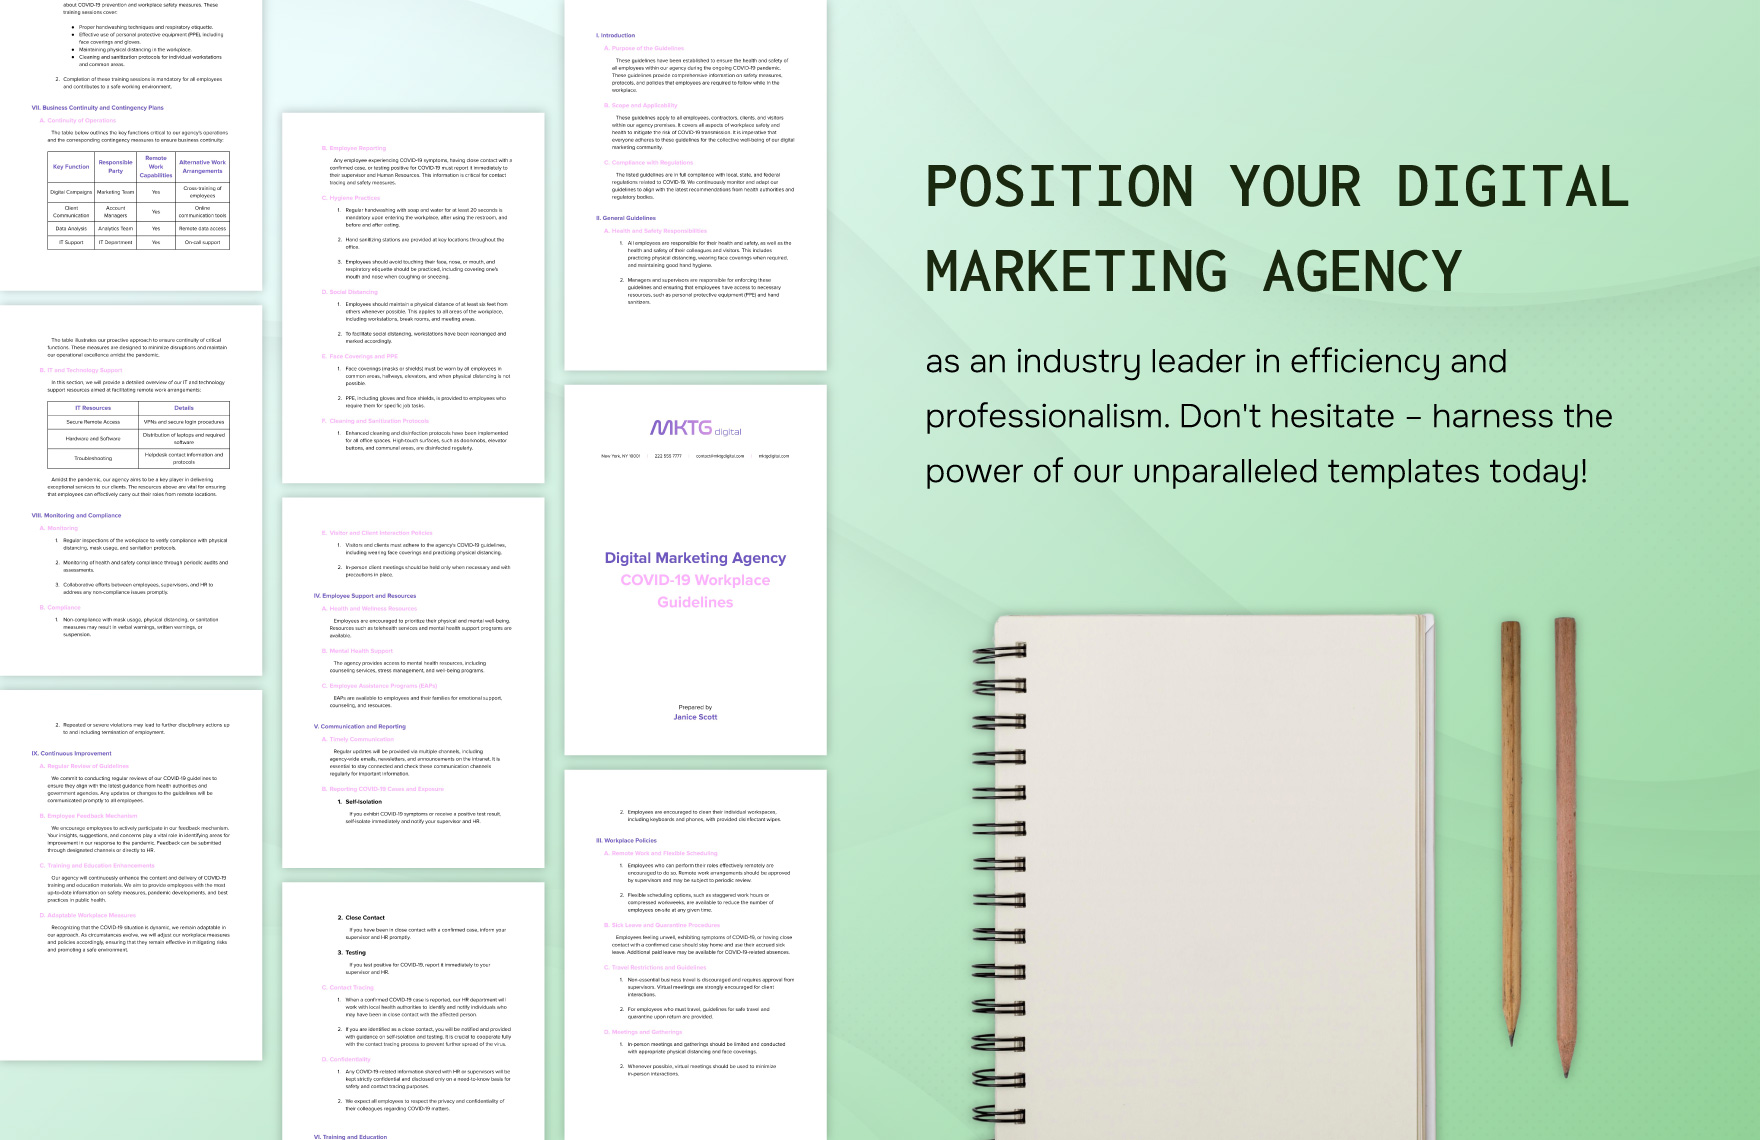 Digital Marketing Agency COVID-19 Workplace Guidelines Template